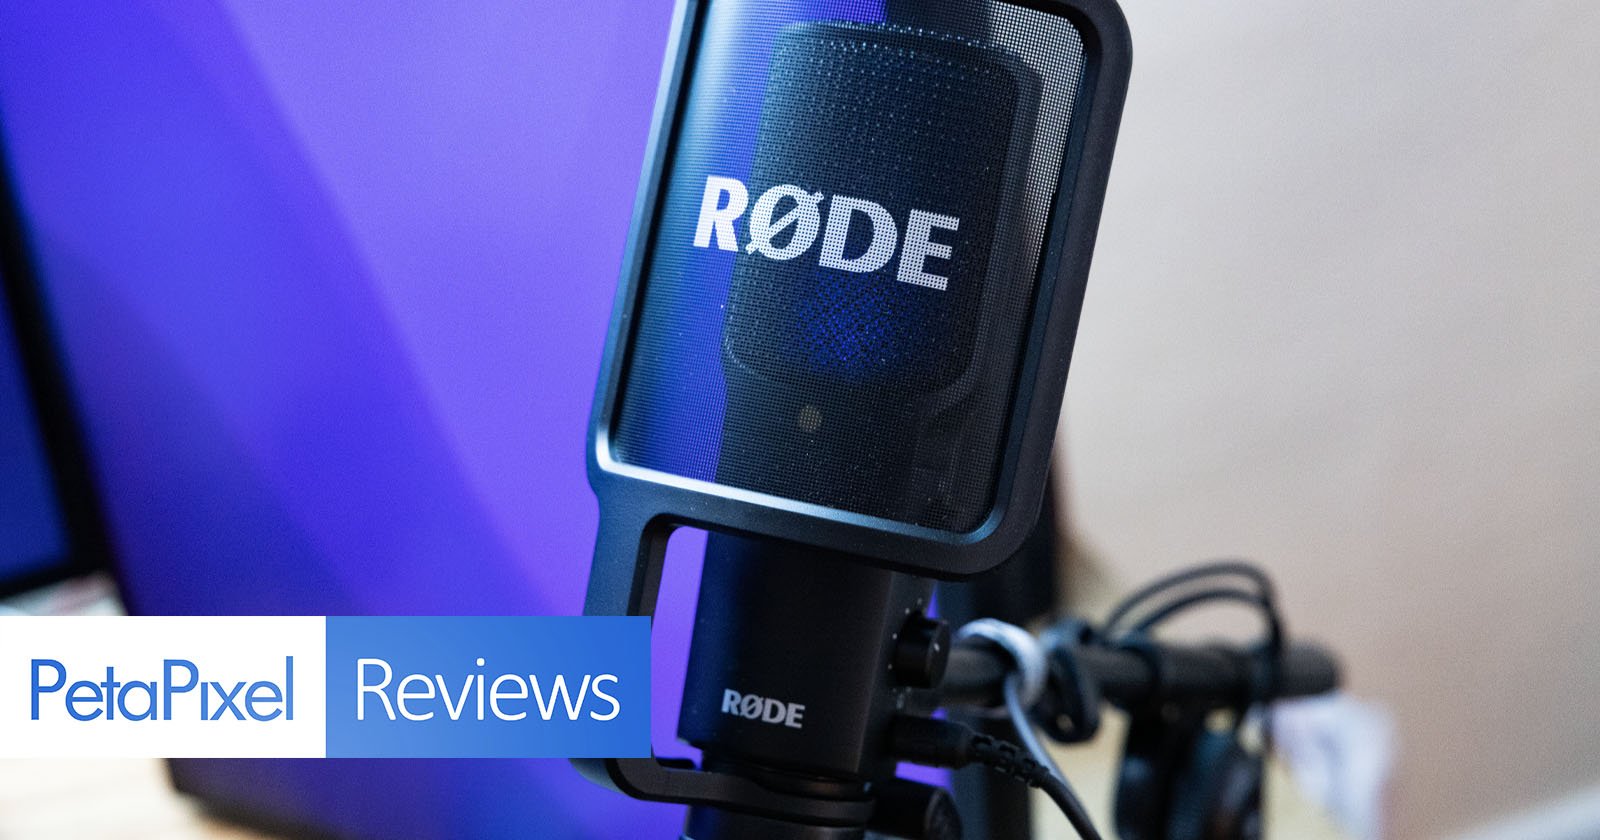 Rode NT USB review